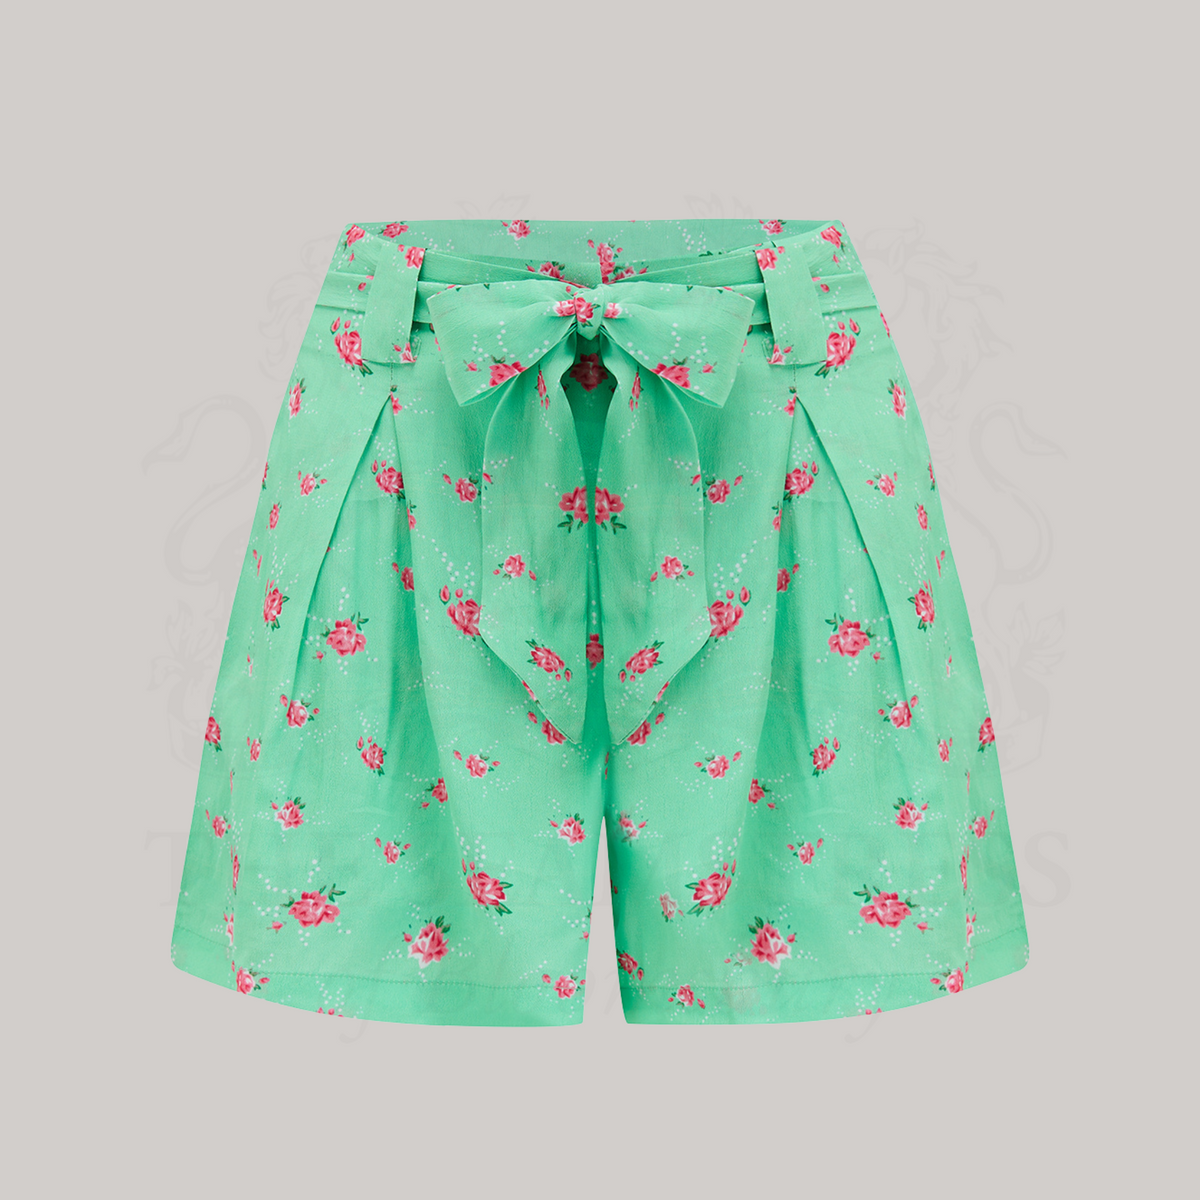 Emma Tap Shorts in Mint Rose